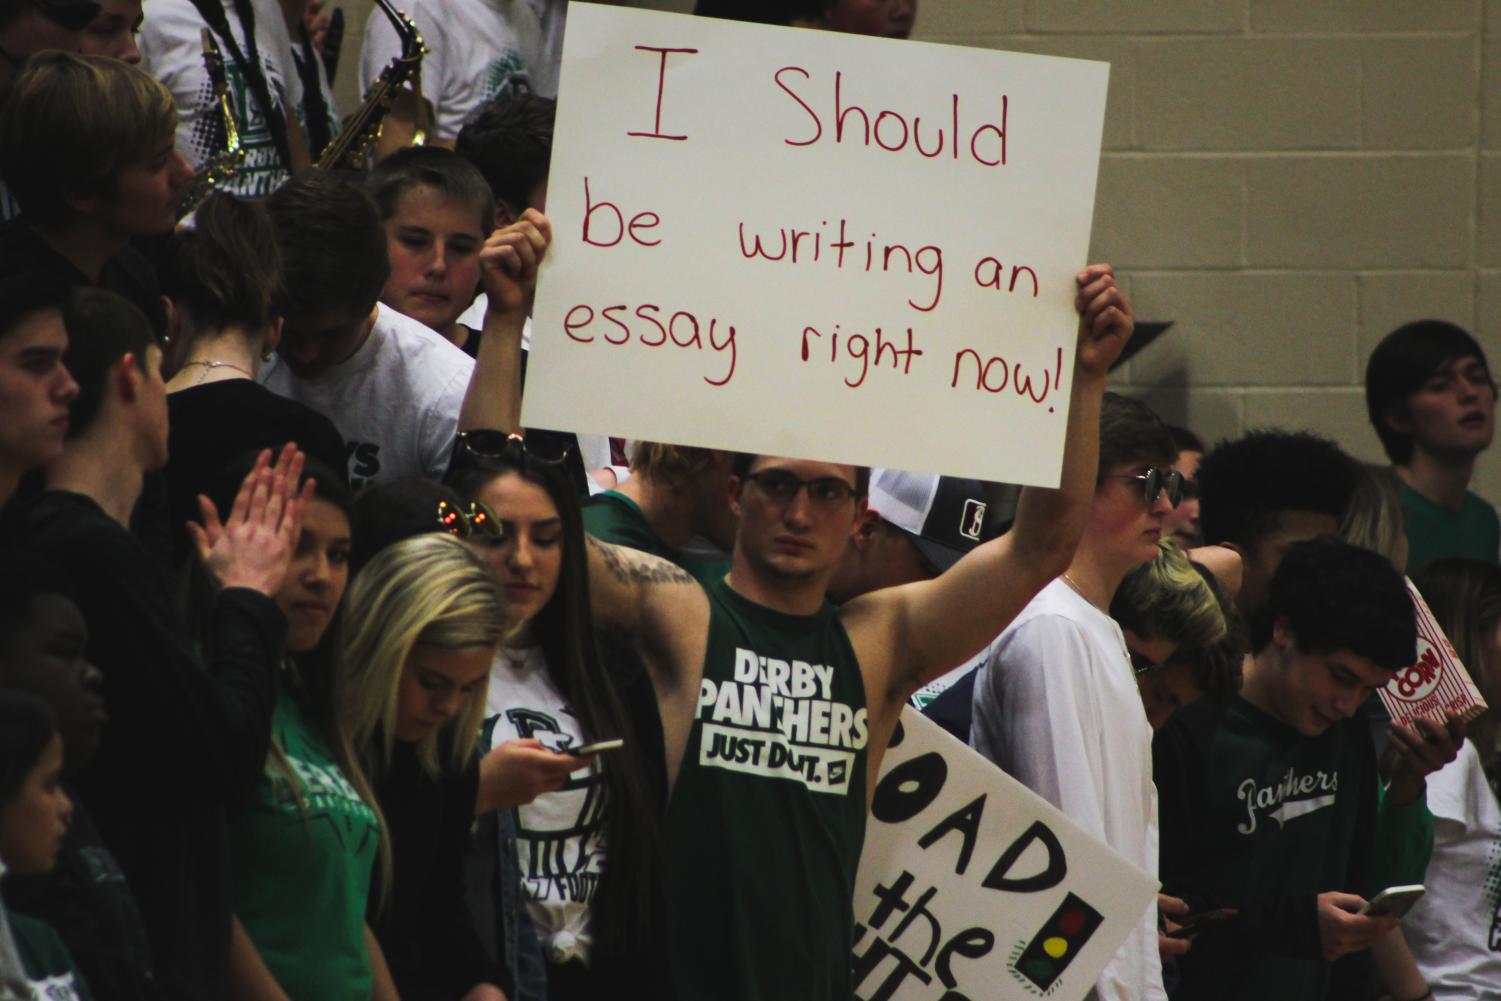 Derby+boys+basketball+win+sub-state+photo+gallery+%28photos+by+Tanner+Hopkins%29